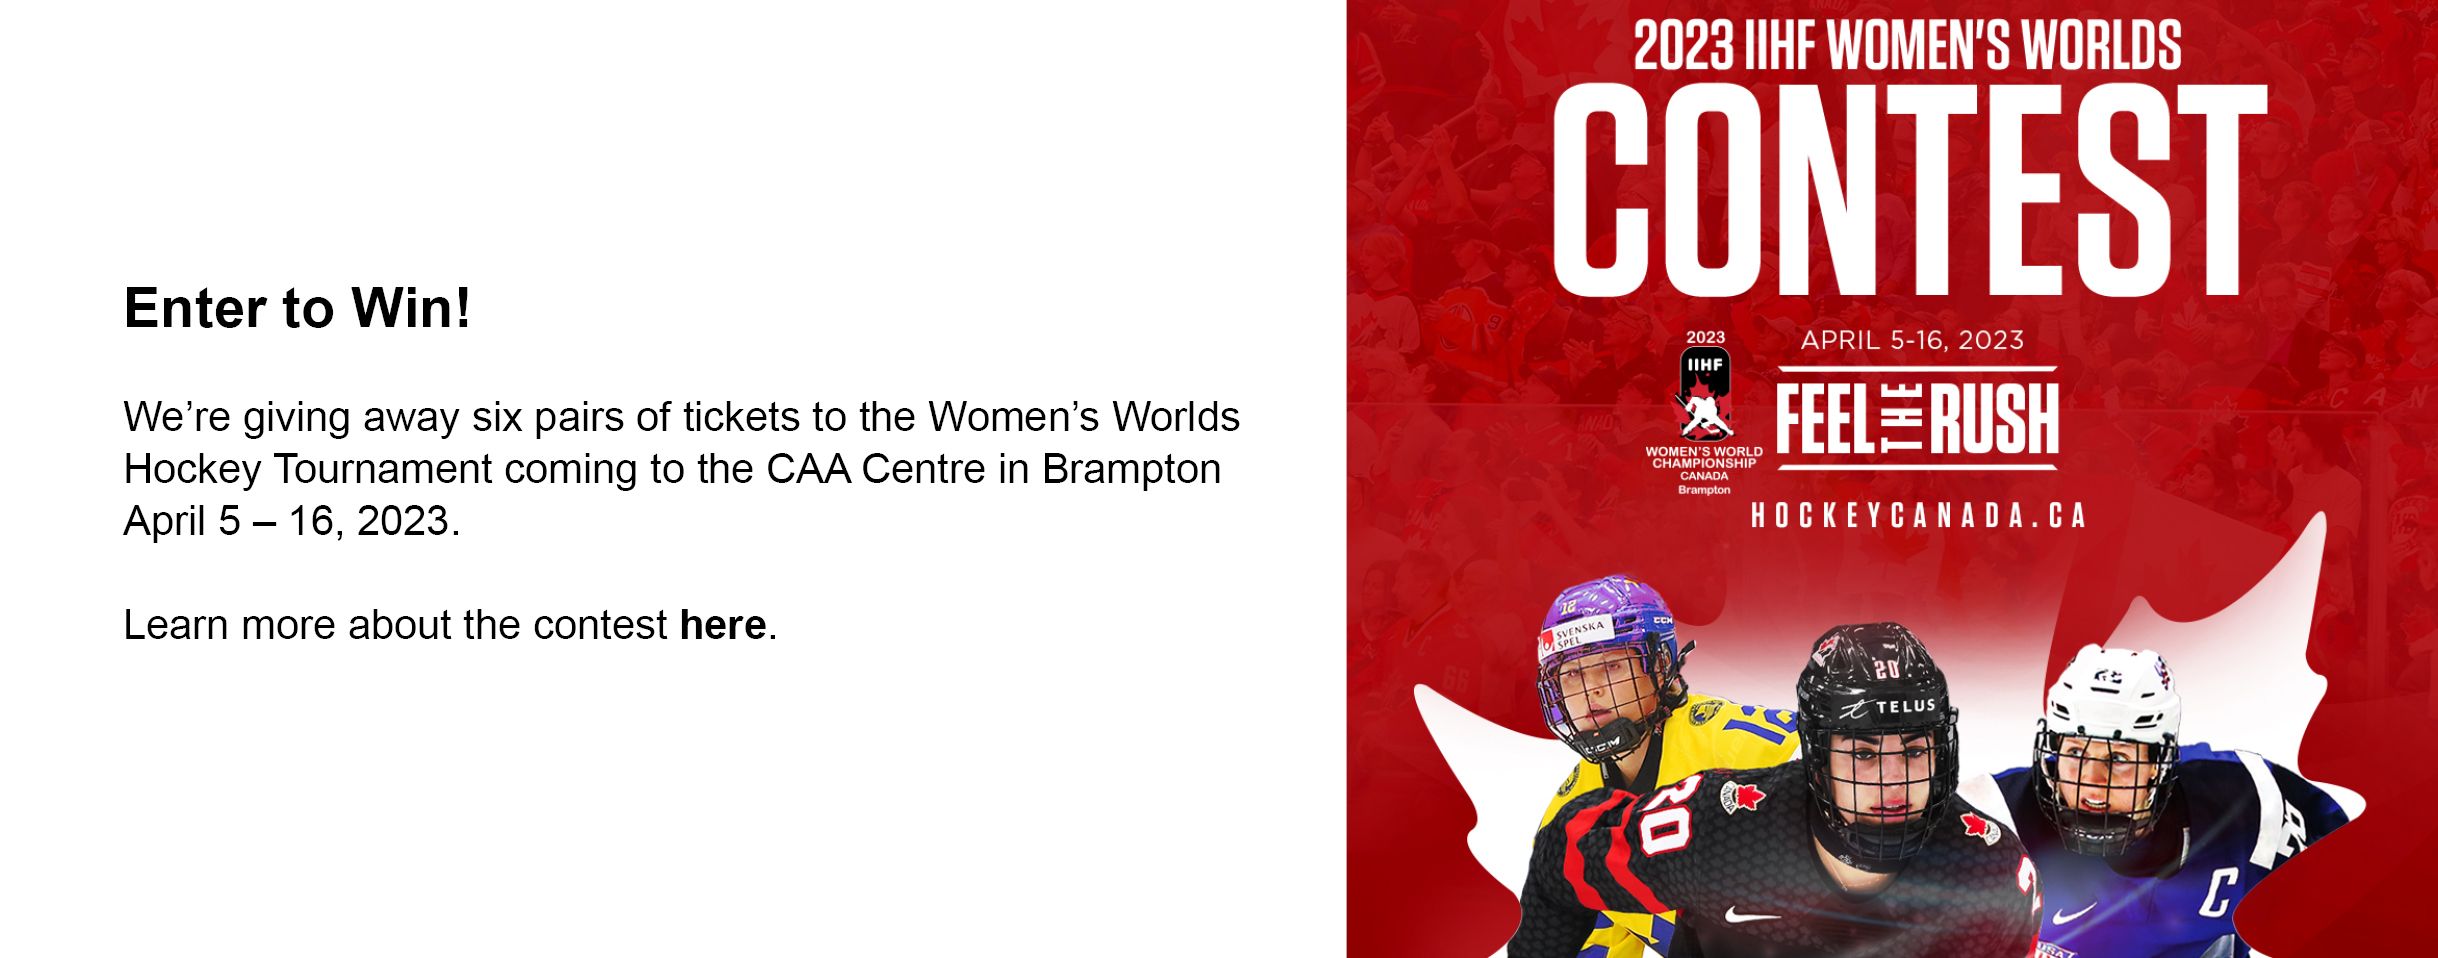 Three female hockey players are featured in front of a white graphic of a maple leaf. The player in front wears a black Team Canada jersey. Text on the graphic reads: 2023 IIHF Women's Worlds Contests. April 5-16, 2023 Feel the Rush. hockeycanada.ca. The 2023 IIHF logo is also included. Web banner text says: Enter to Win! We're giving away six pairs of tickets to the Women's Worlds Hockey Tournament coming to the CAA Centre in Brampton April 5 to 16, 2023. Learn more about the contest here. 